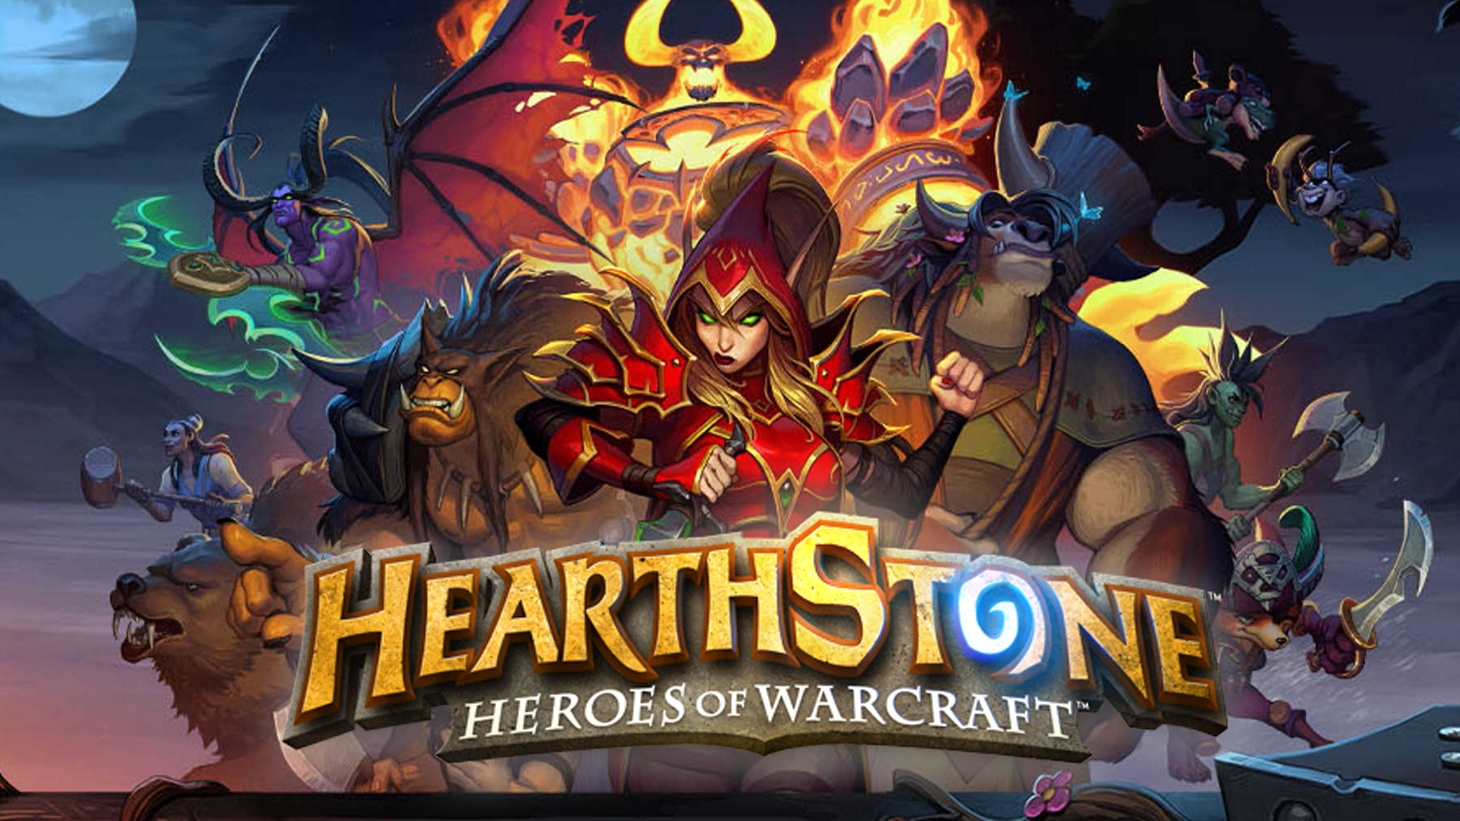 Hearthstone Heroes of Warcraft PC Game Latest Version Free Download